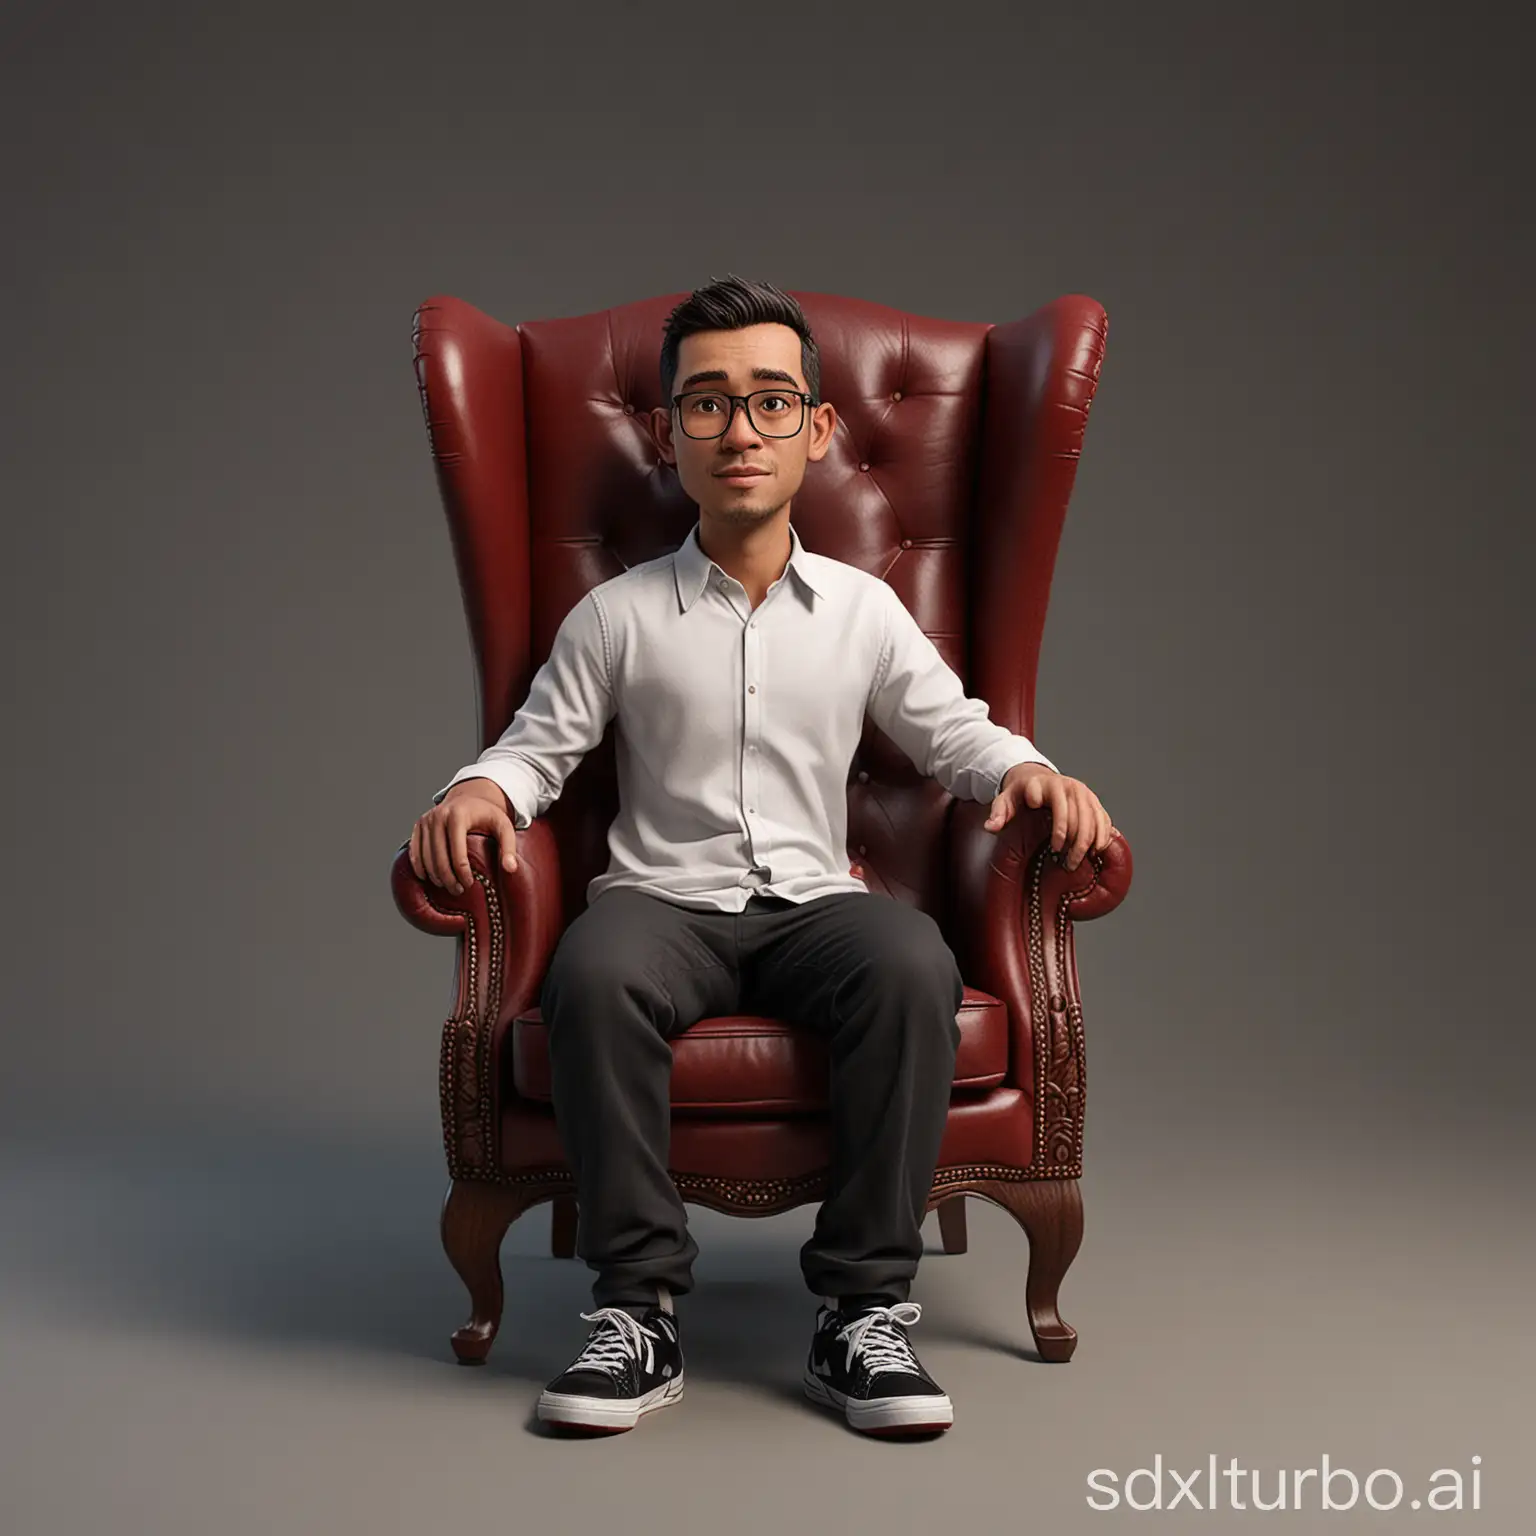 Create a caricature 3D Realistic Disney pixar style full body with a big head. an Indonesian male photographer, a 35 year old man, is sitting relaxed in a classic dark red wingback wooden chair, the wood texture is clear. Wearing a white t-shirt covered with a black suit, wearing black cloth trousers. Wearing air jordan sneakers. Sit with your legs crossed, your right hand holding a camera, your left hand placed on the edge of the chair. The background should contrast with the color of the chair and clothing,enhancing the overall composition of the picture. Use soft photography lighting, dramatic overhead lighting, very high image quality, clear character details, UHD, 16k.